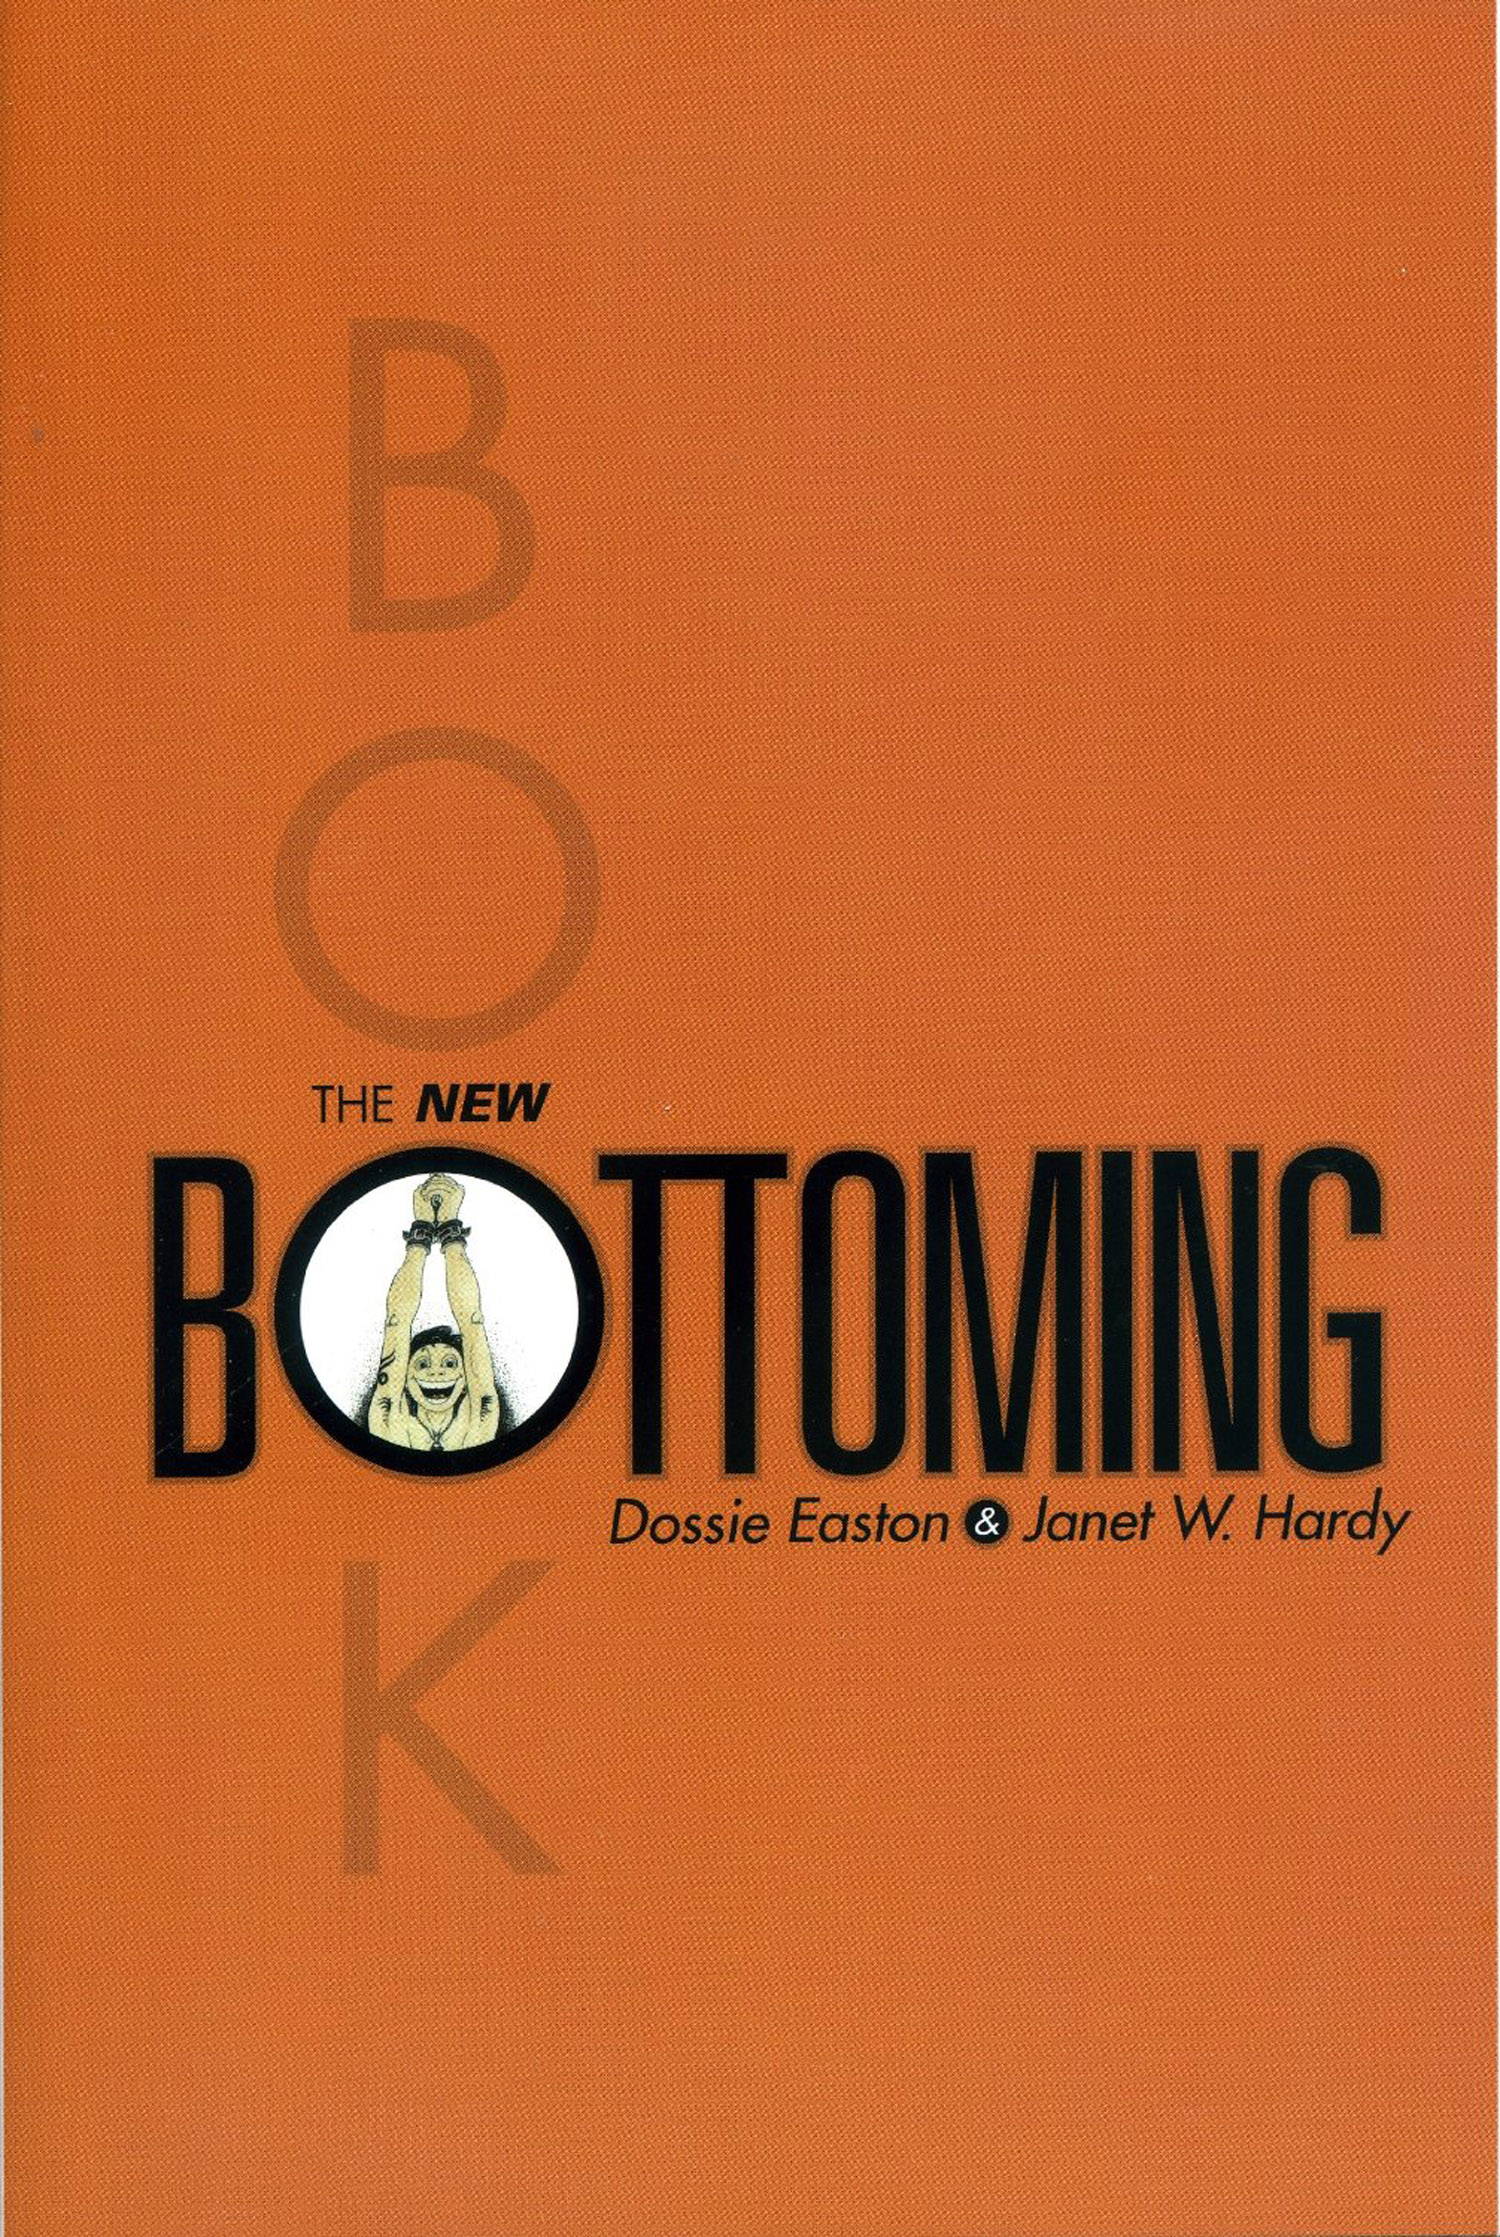 The New Bottoming Book by Dossie Easton